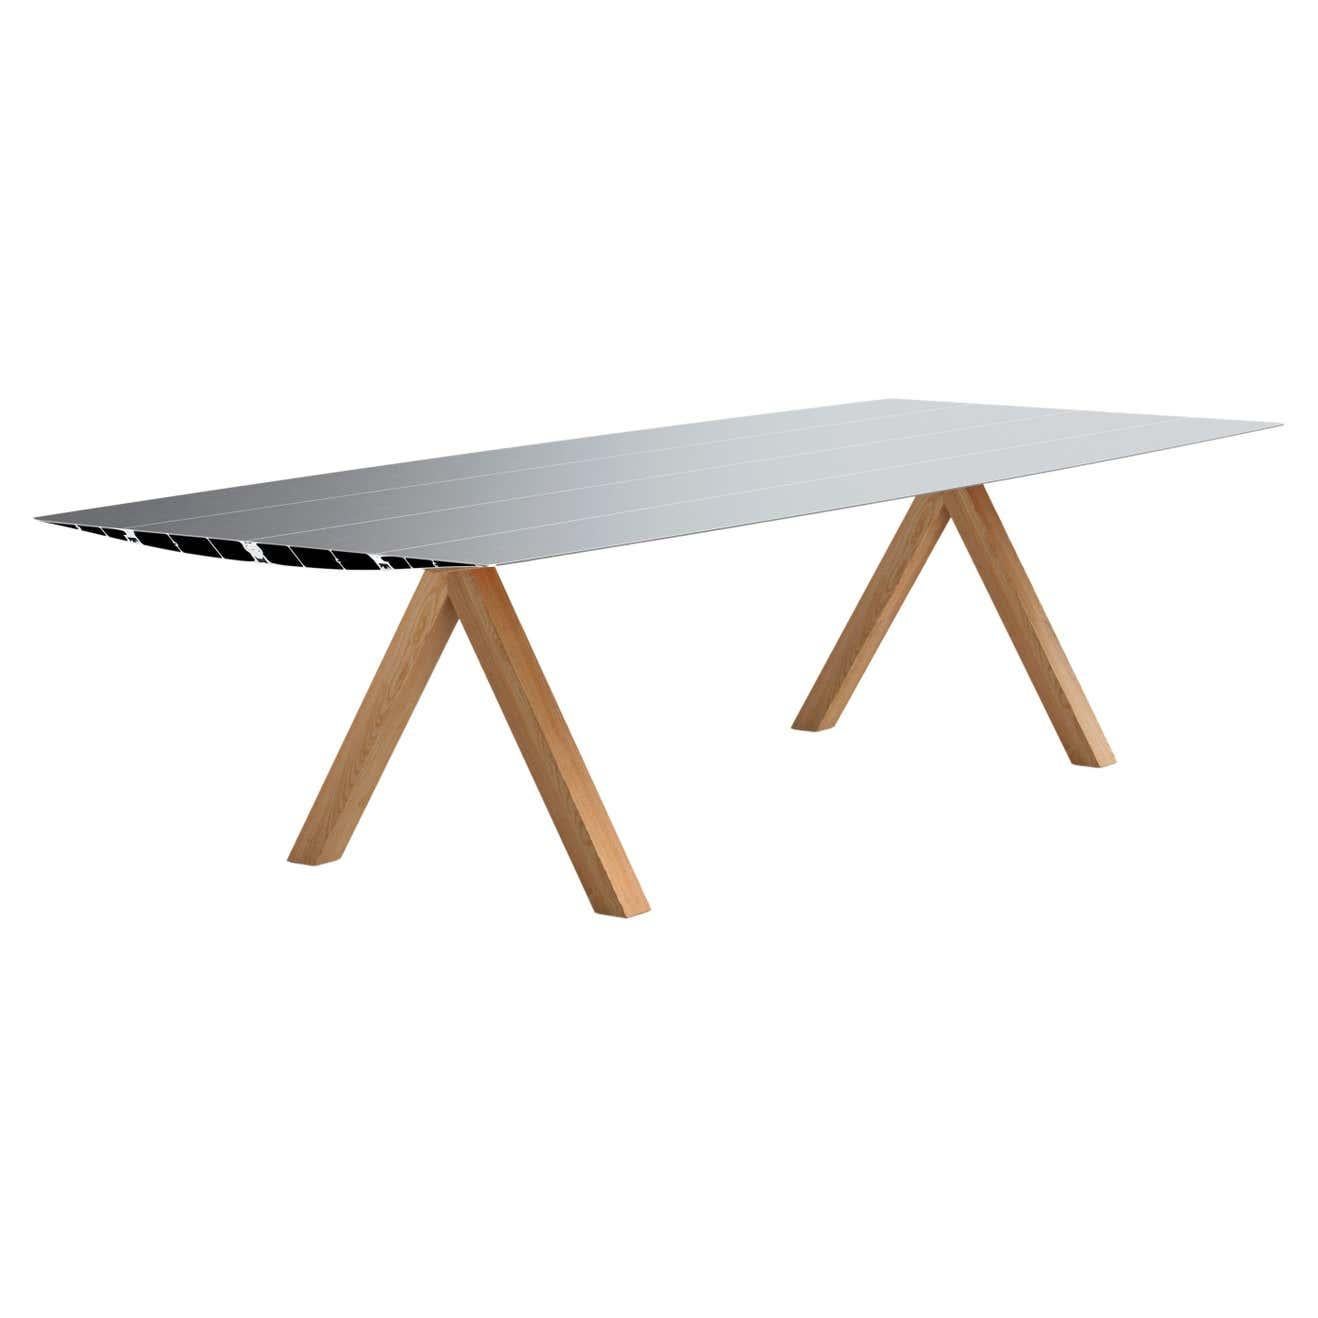 Dinning Table B 120cm x 300 cm Aluminum Anodized Silver Top Wooden legs

Materials: 
Aluminium, oak, ash

Dimensions: 
D 120 cm x W 300 cm x H 74 cm

The Table B, which inaugurated the Extrusions Collection in 2009, can reach up to five